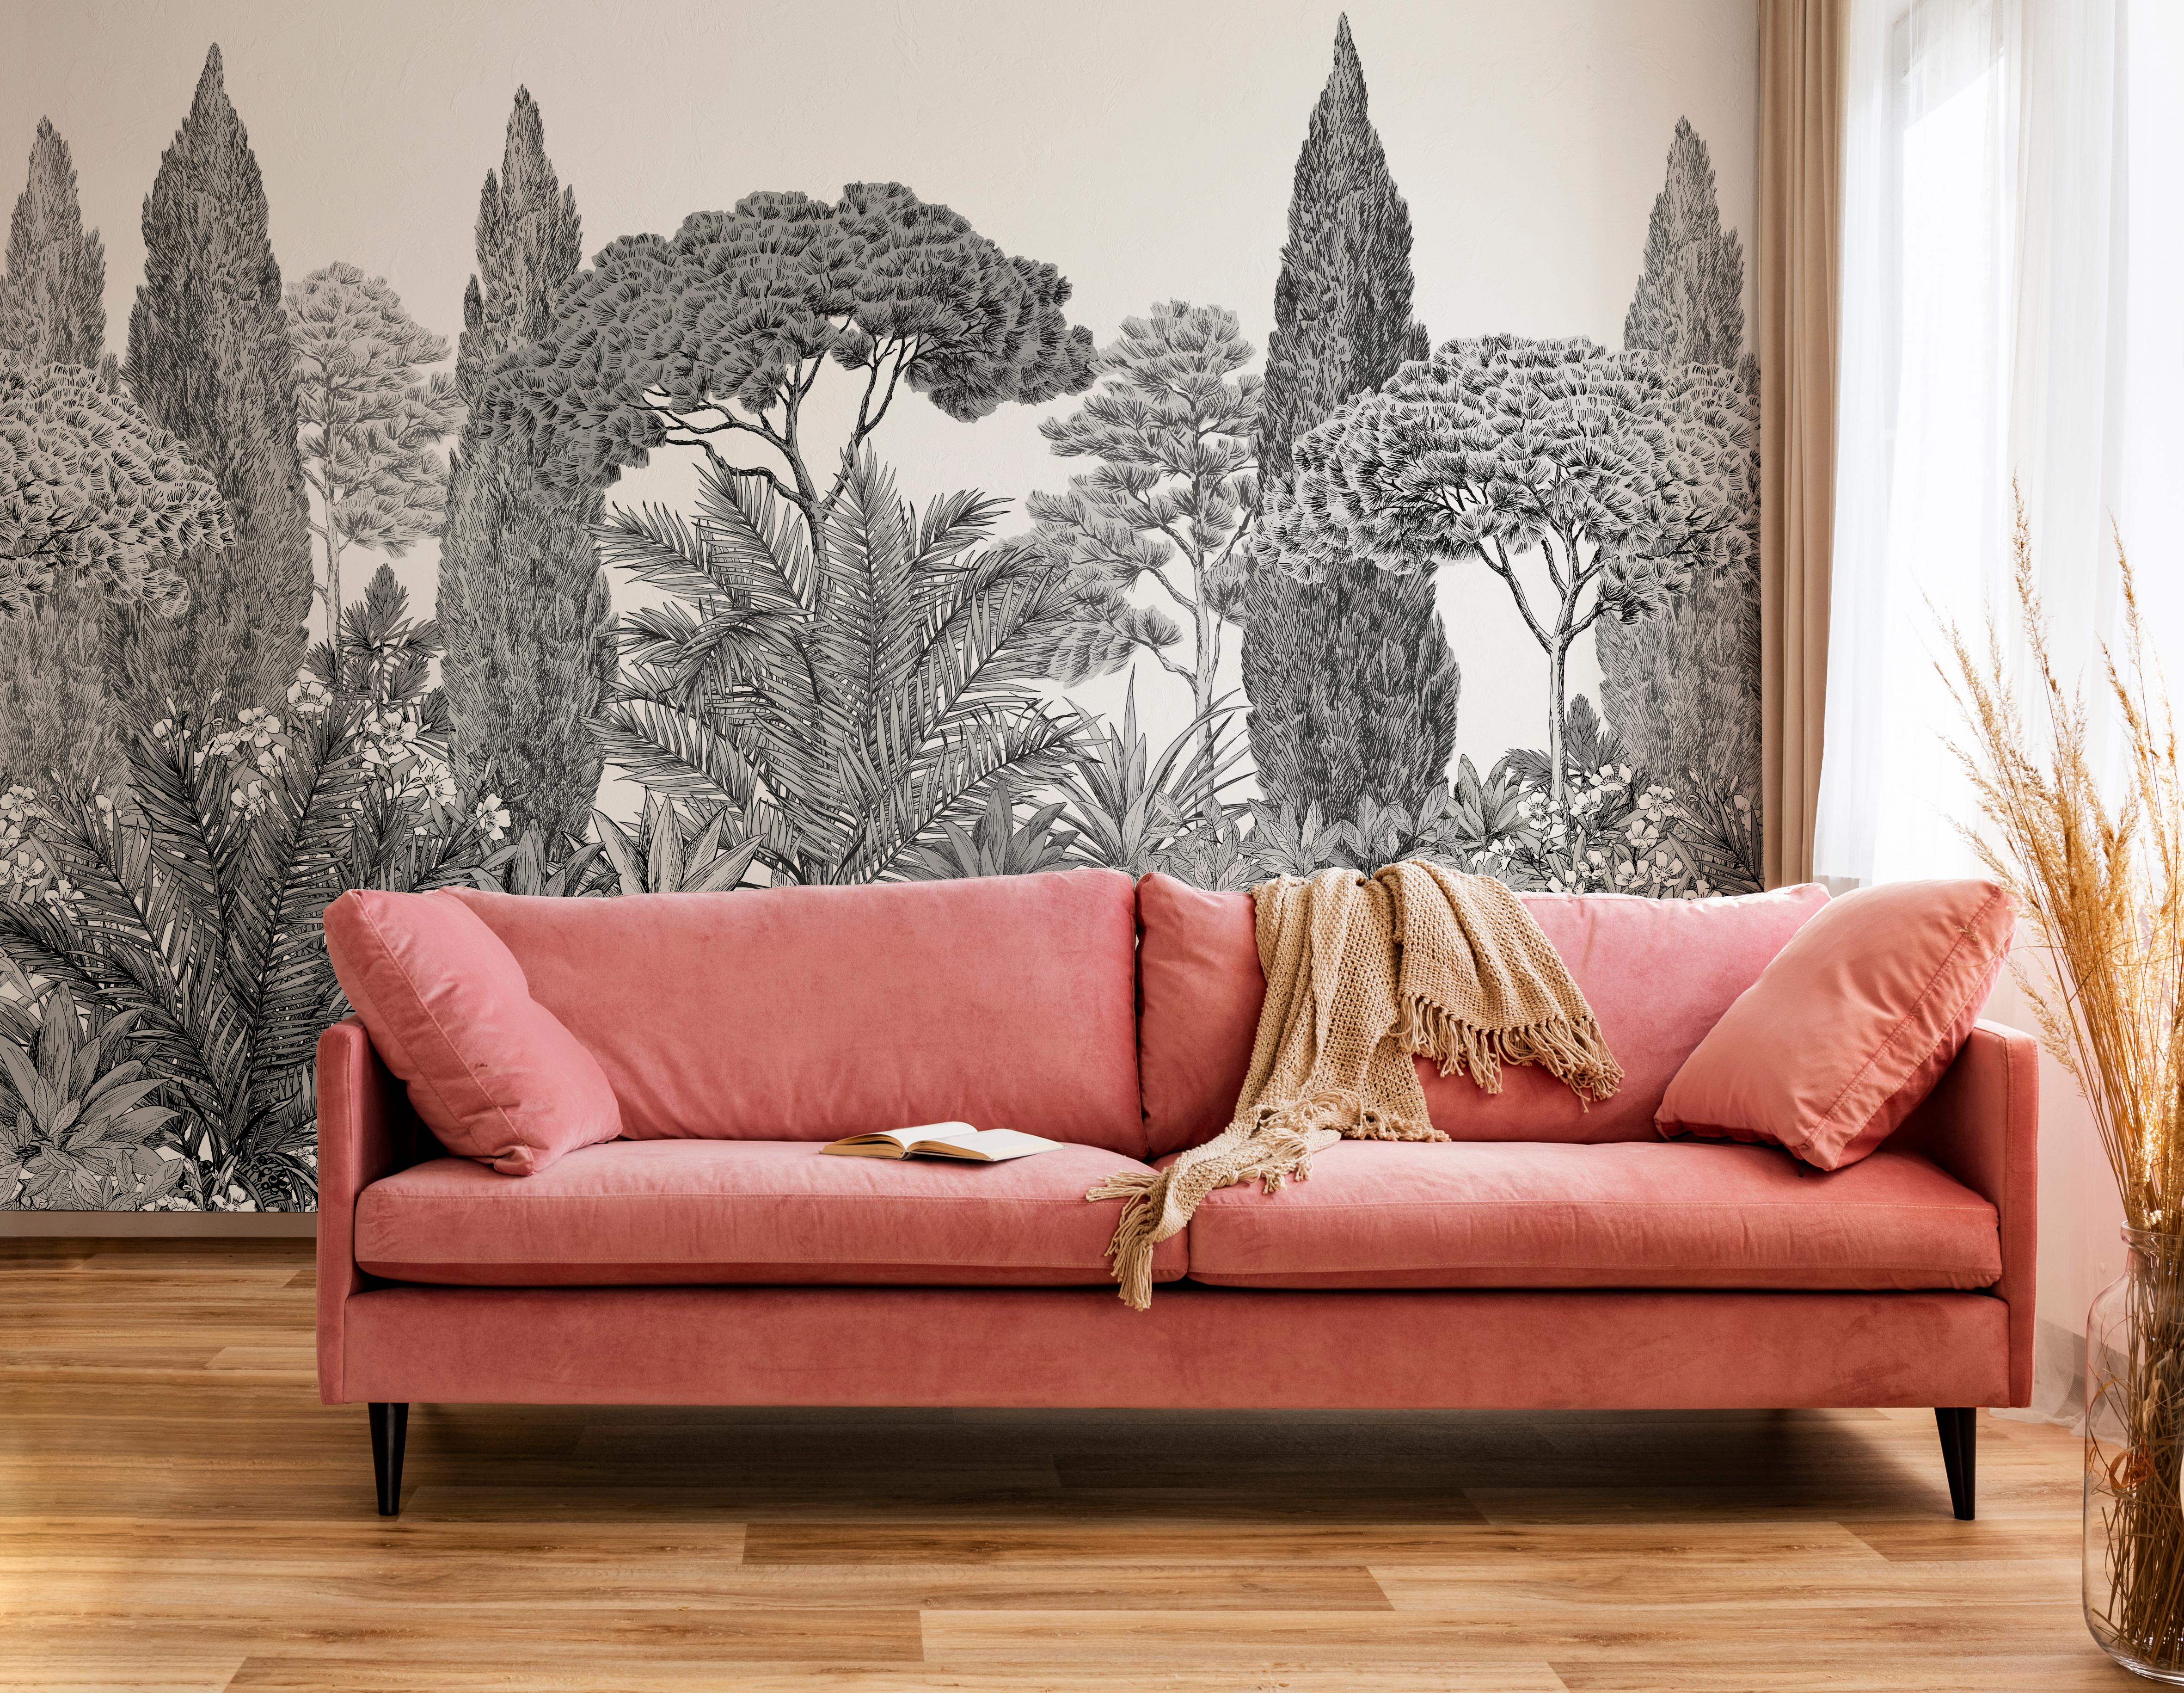 French Riviera, Customizable, Digital Printing, Mural Decor, Isidore Leroy For Sale